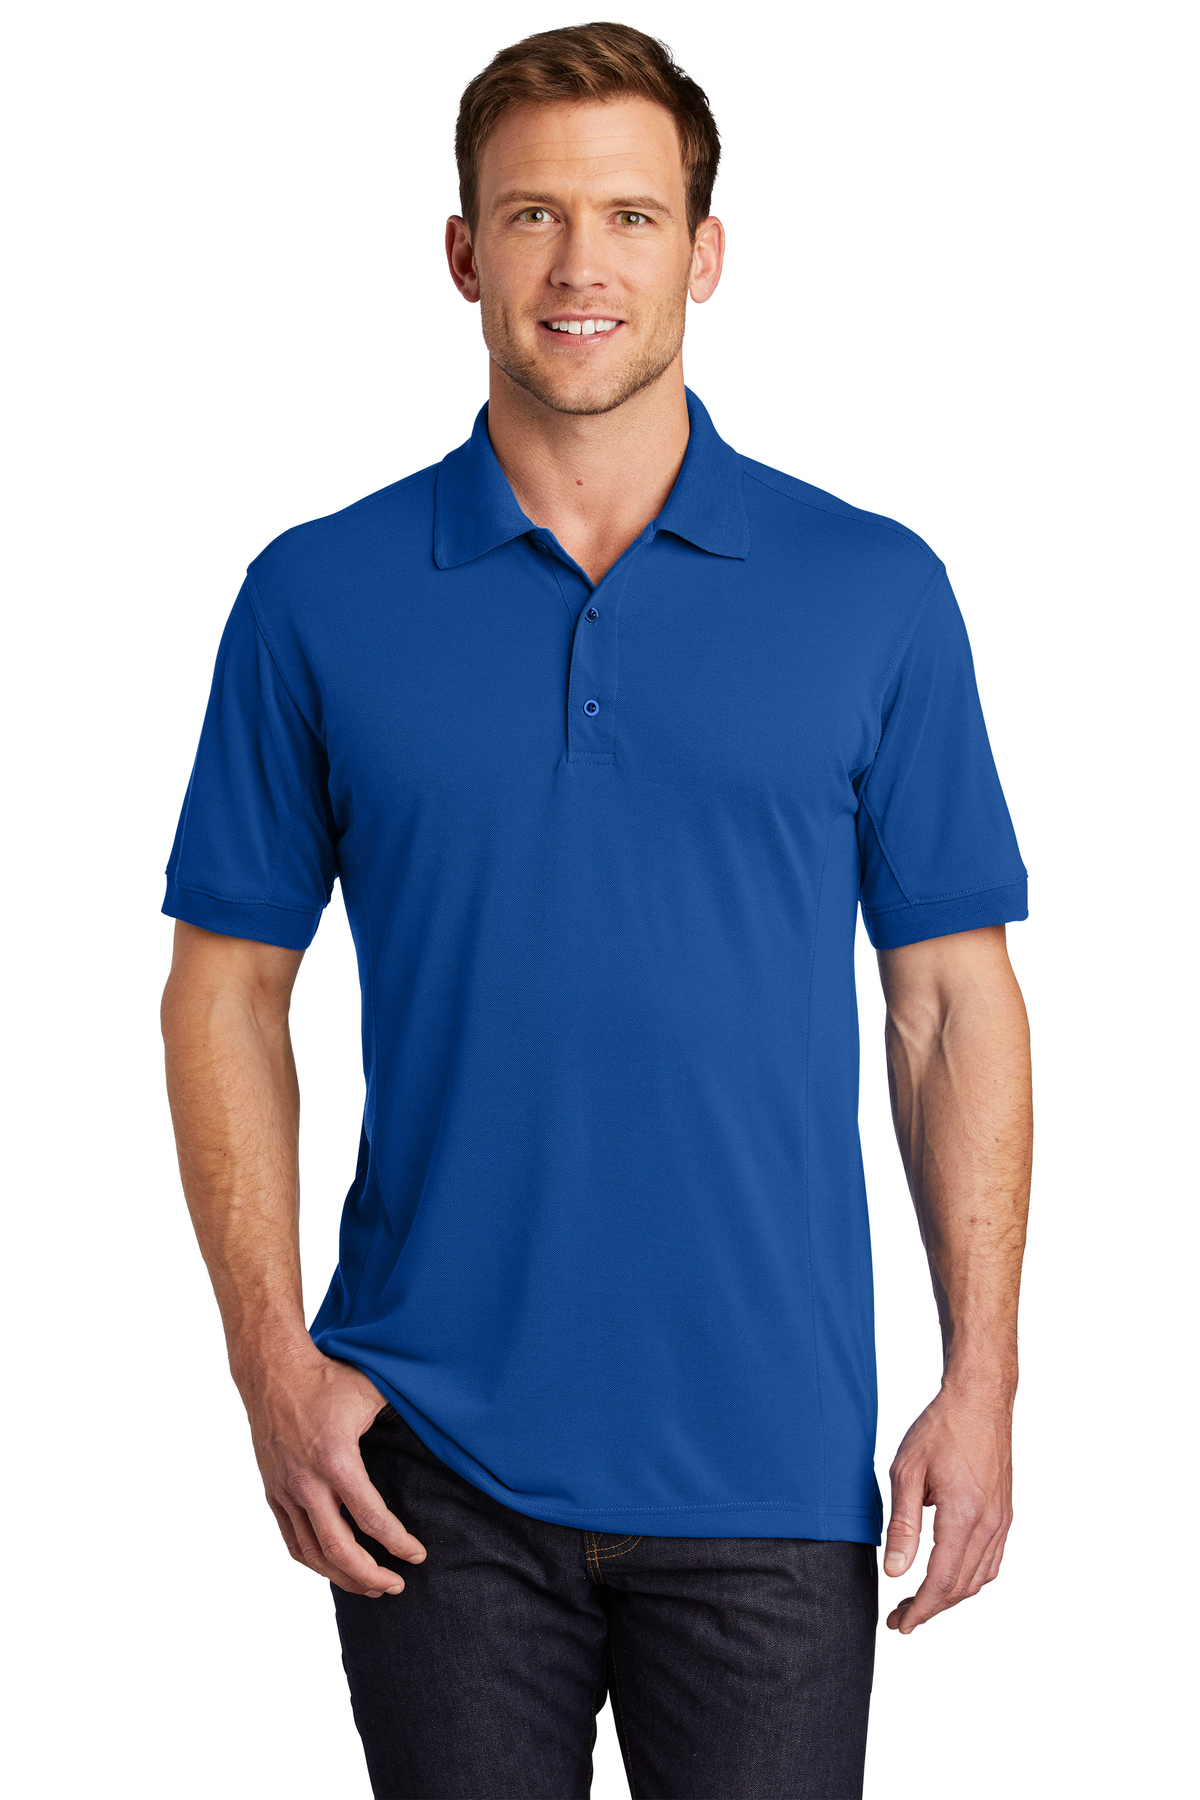 Port Authority 5-in-1 Performance Pique Polo | Product | SanMar